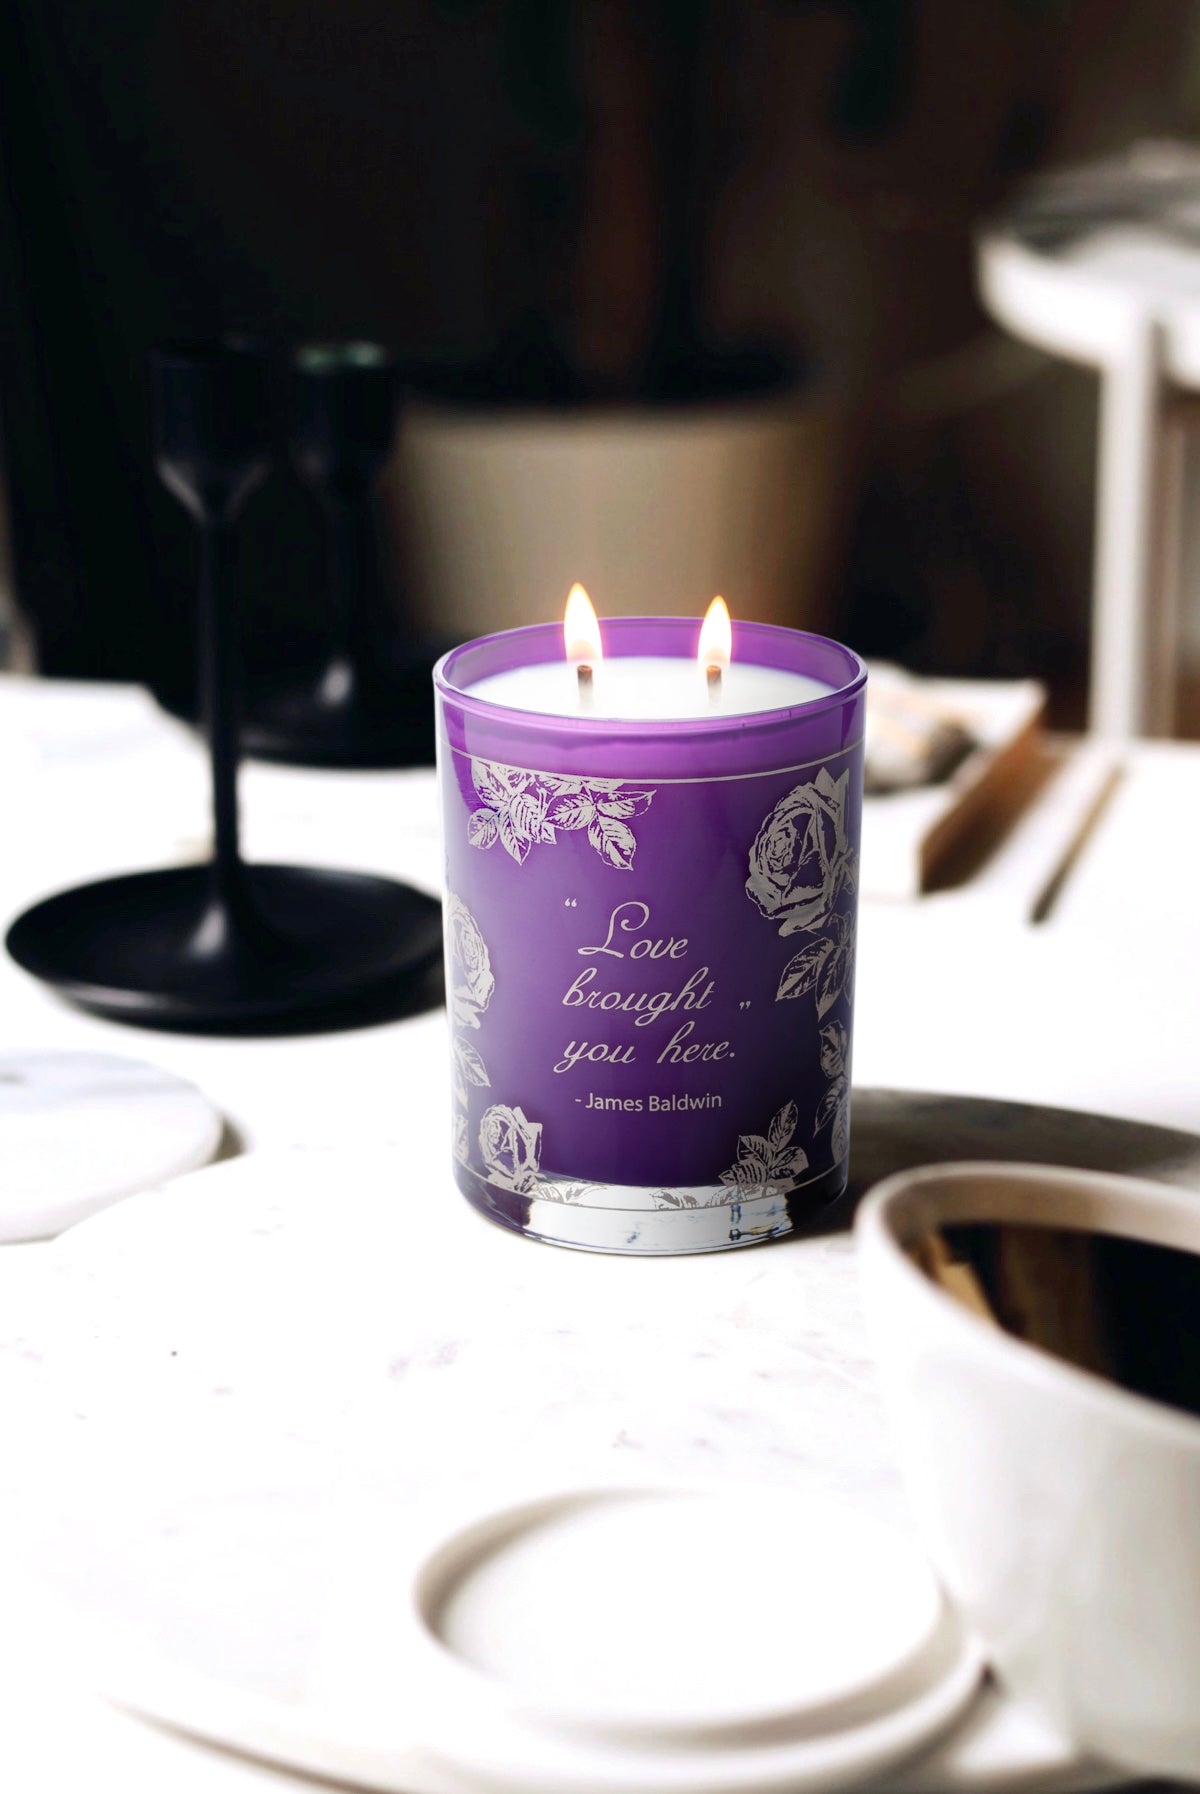 Limited edition purple and silver Love candle.  It says "Love Brought You Here" - James Baldwin. This photo was taken in a lifestyle setting with non-descript items in the background